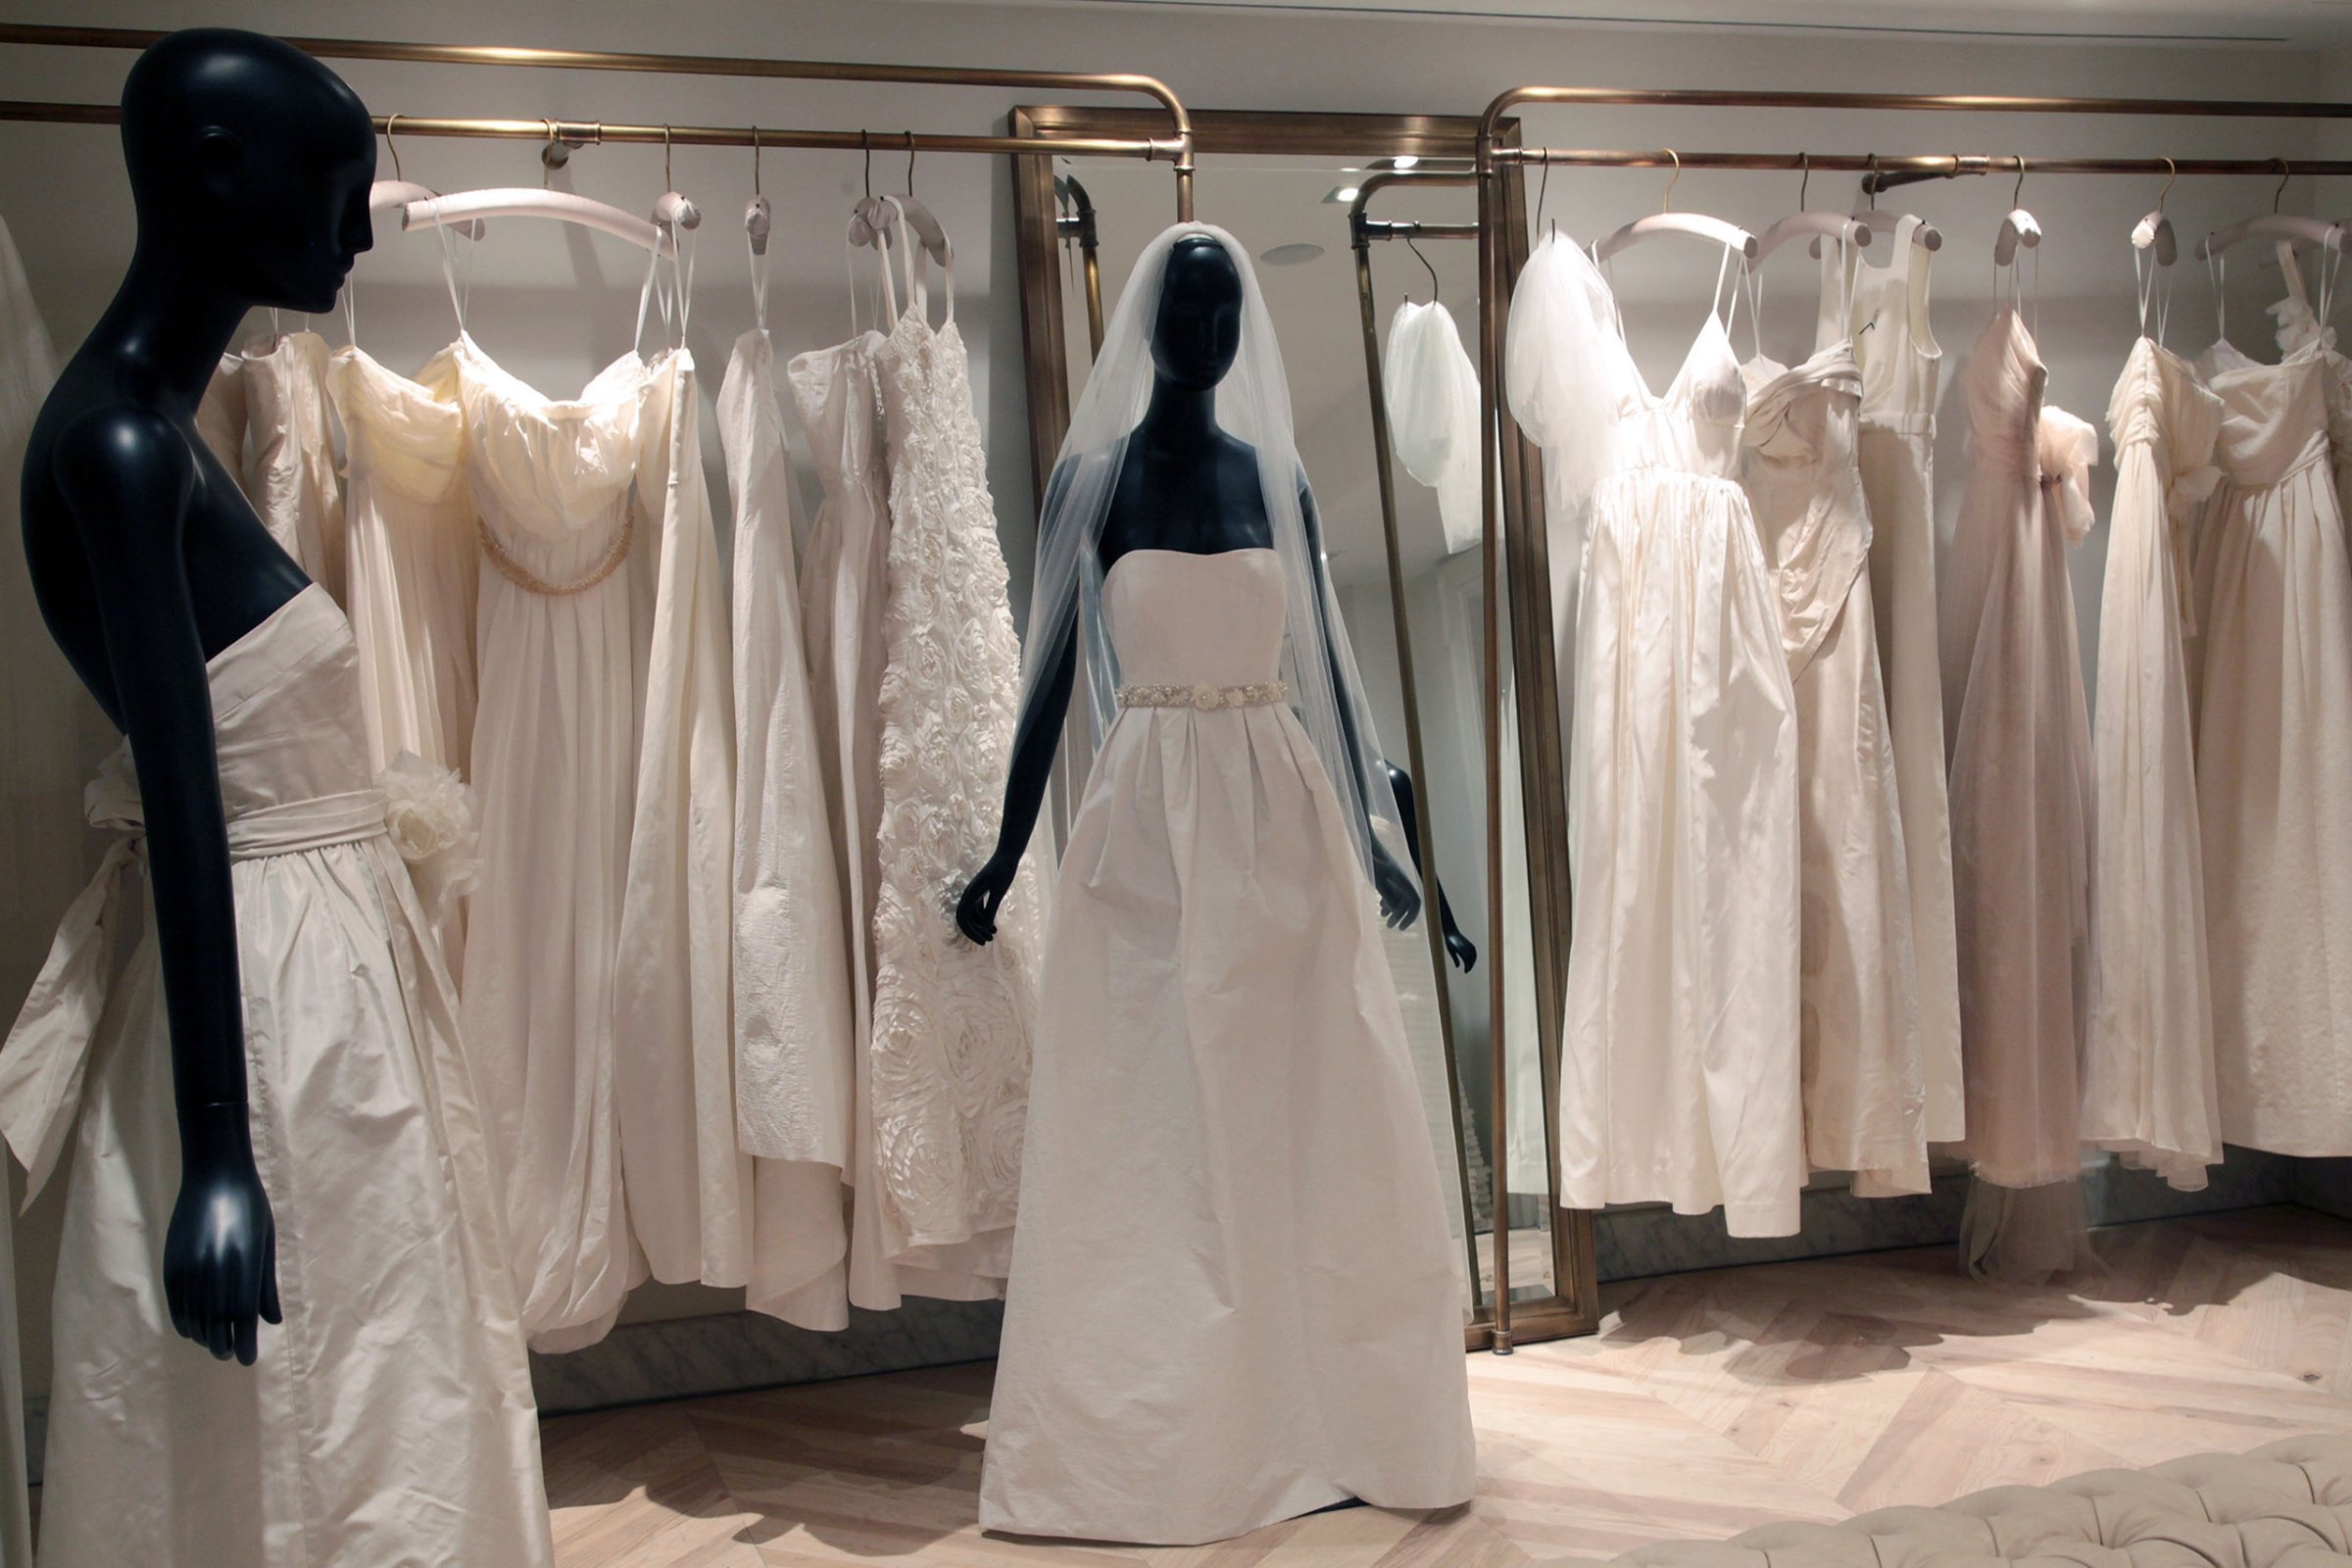 Darcy Miller Hosts The Opening Of The J.Crew Bridal Boutique